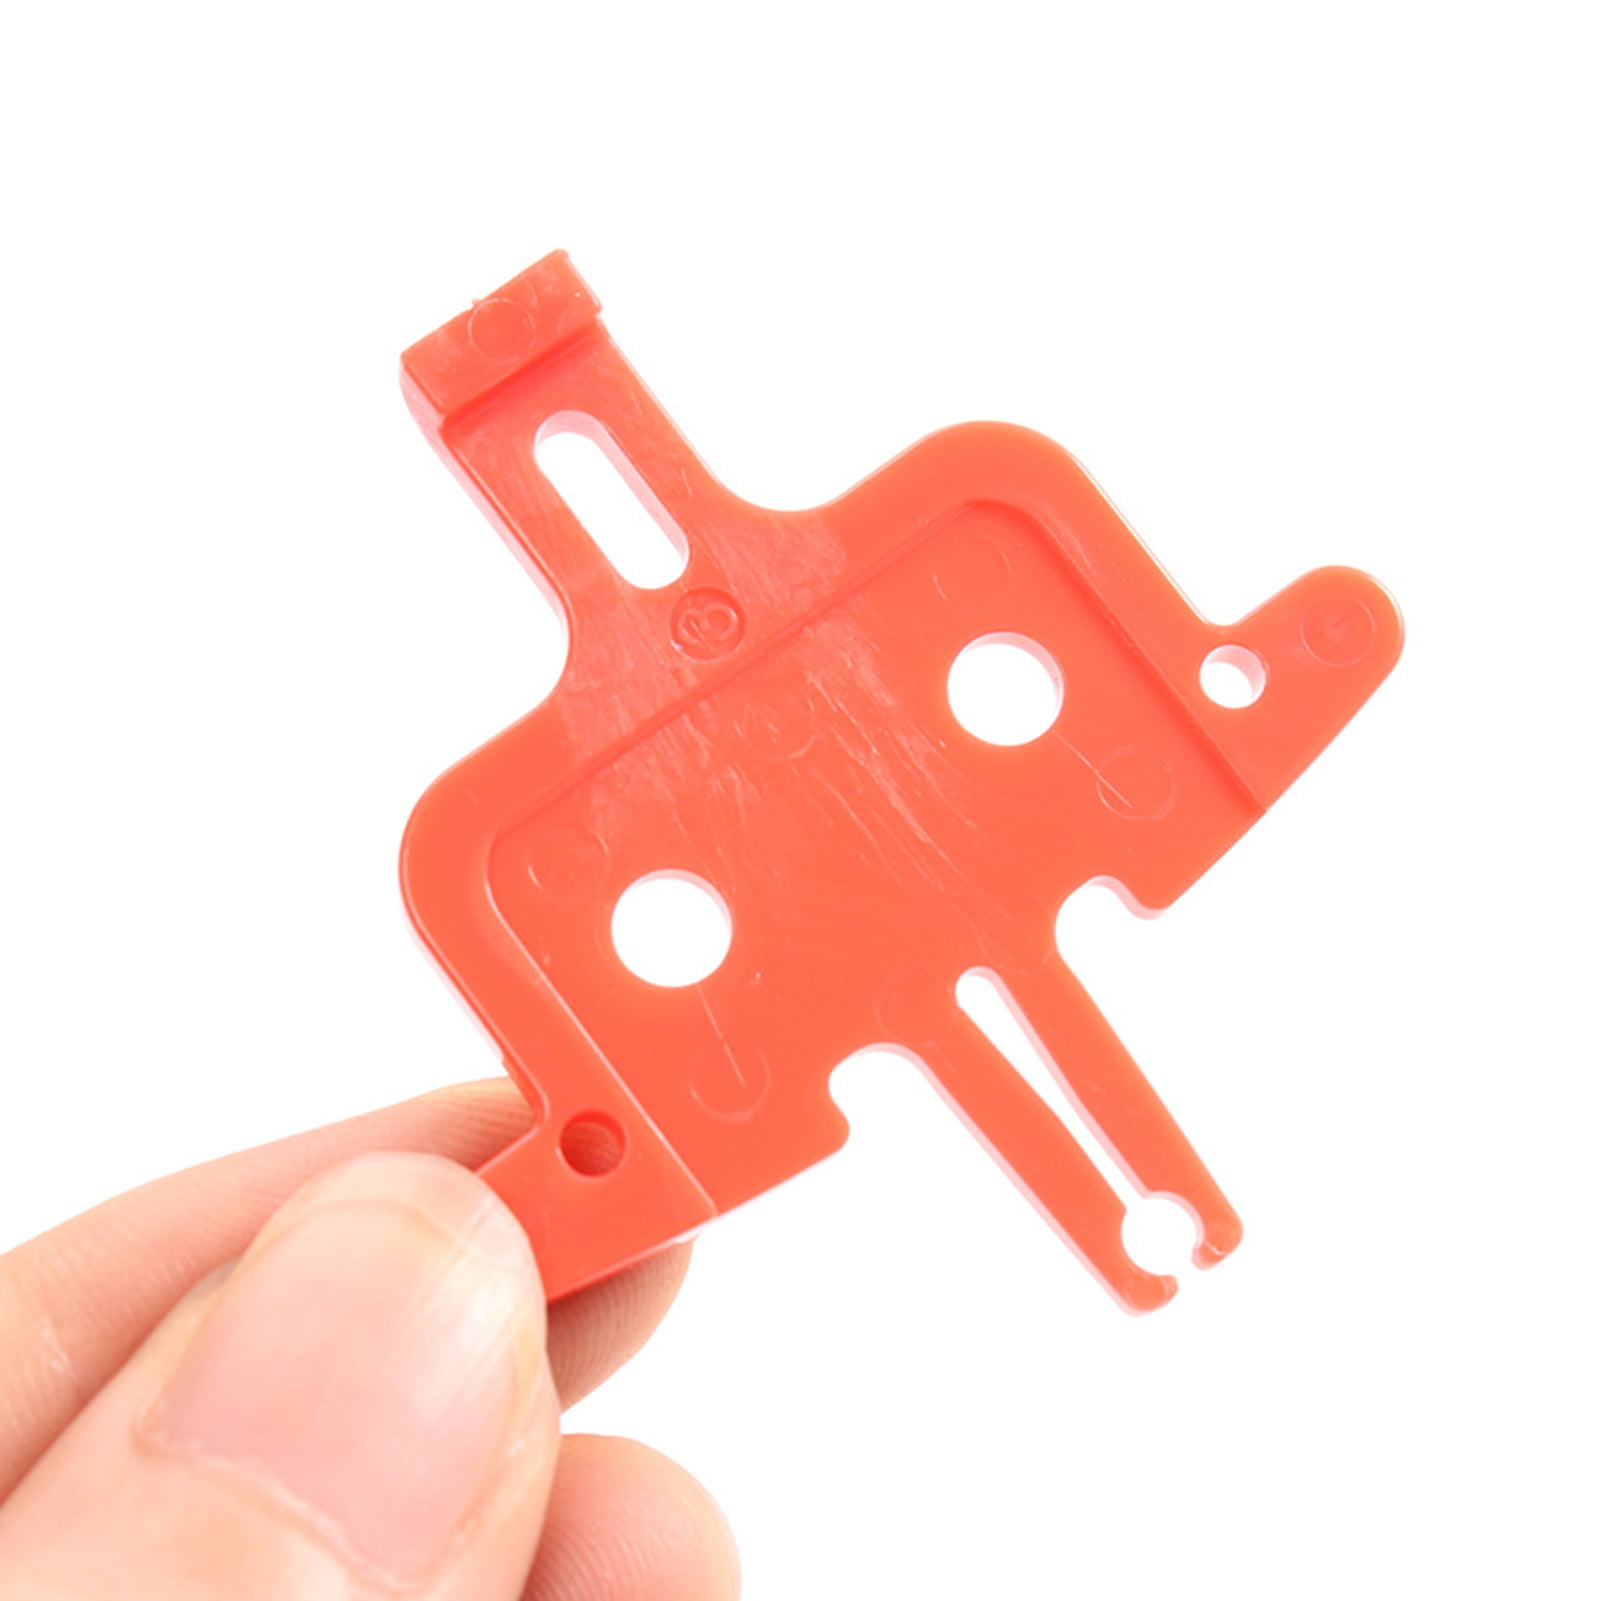 huiouer Bicycle Brake Spacer Disc Brakes Oil Pressure MTB Bike Parts Prevent Empty Pinch Cycling Accessories Repair Tools Protector Plastic Plate For Shimano